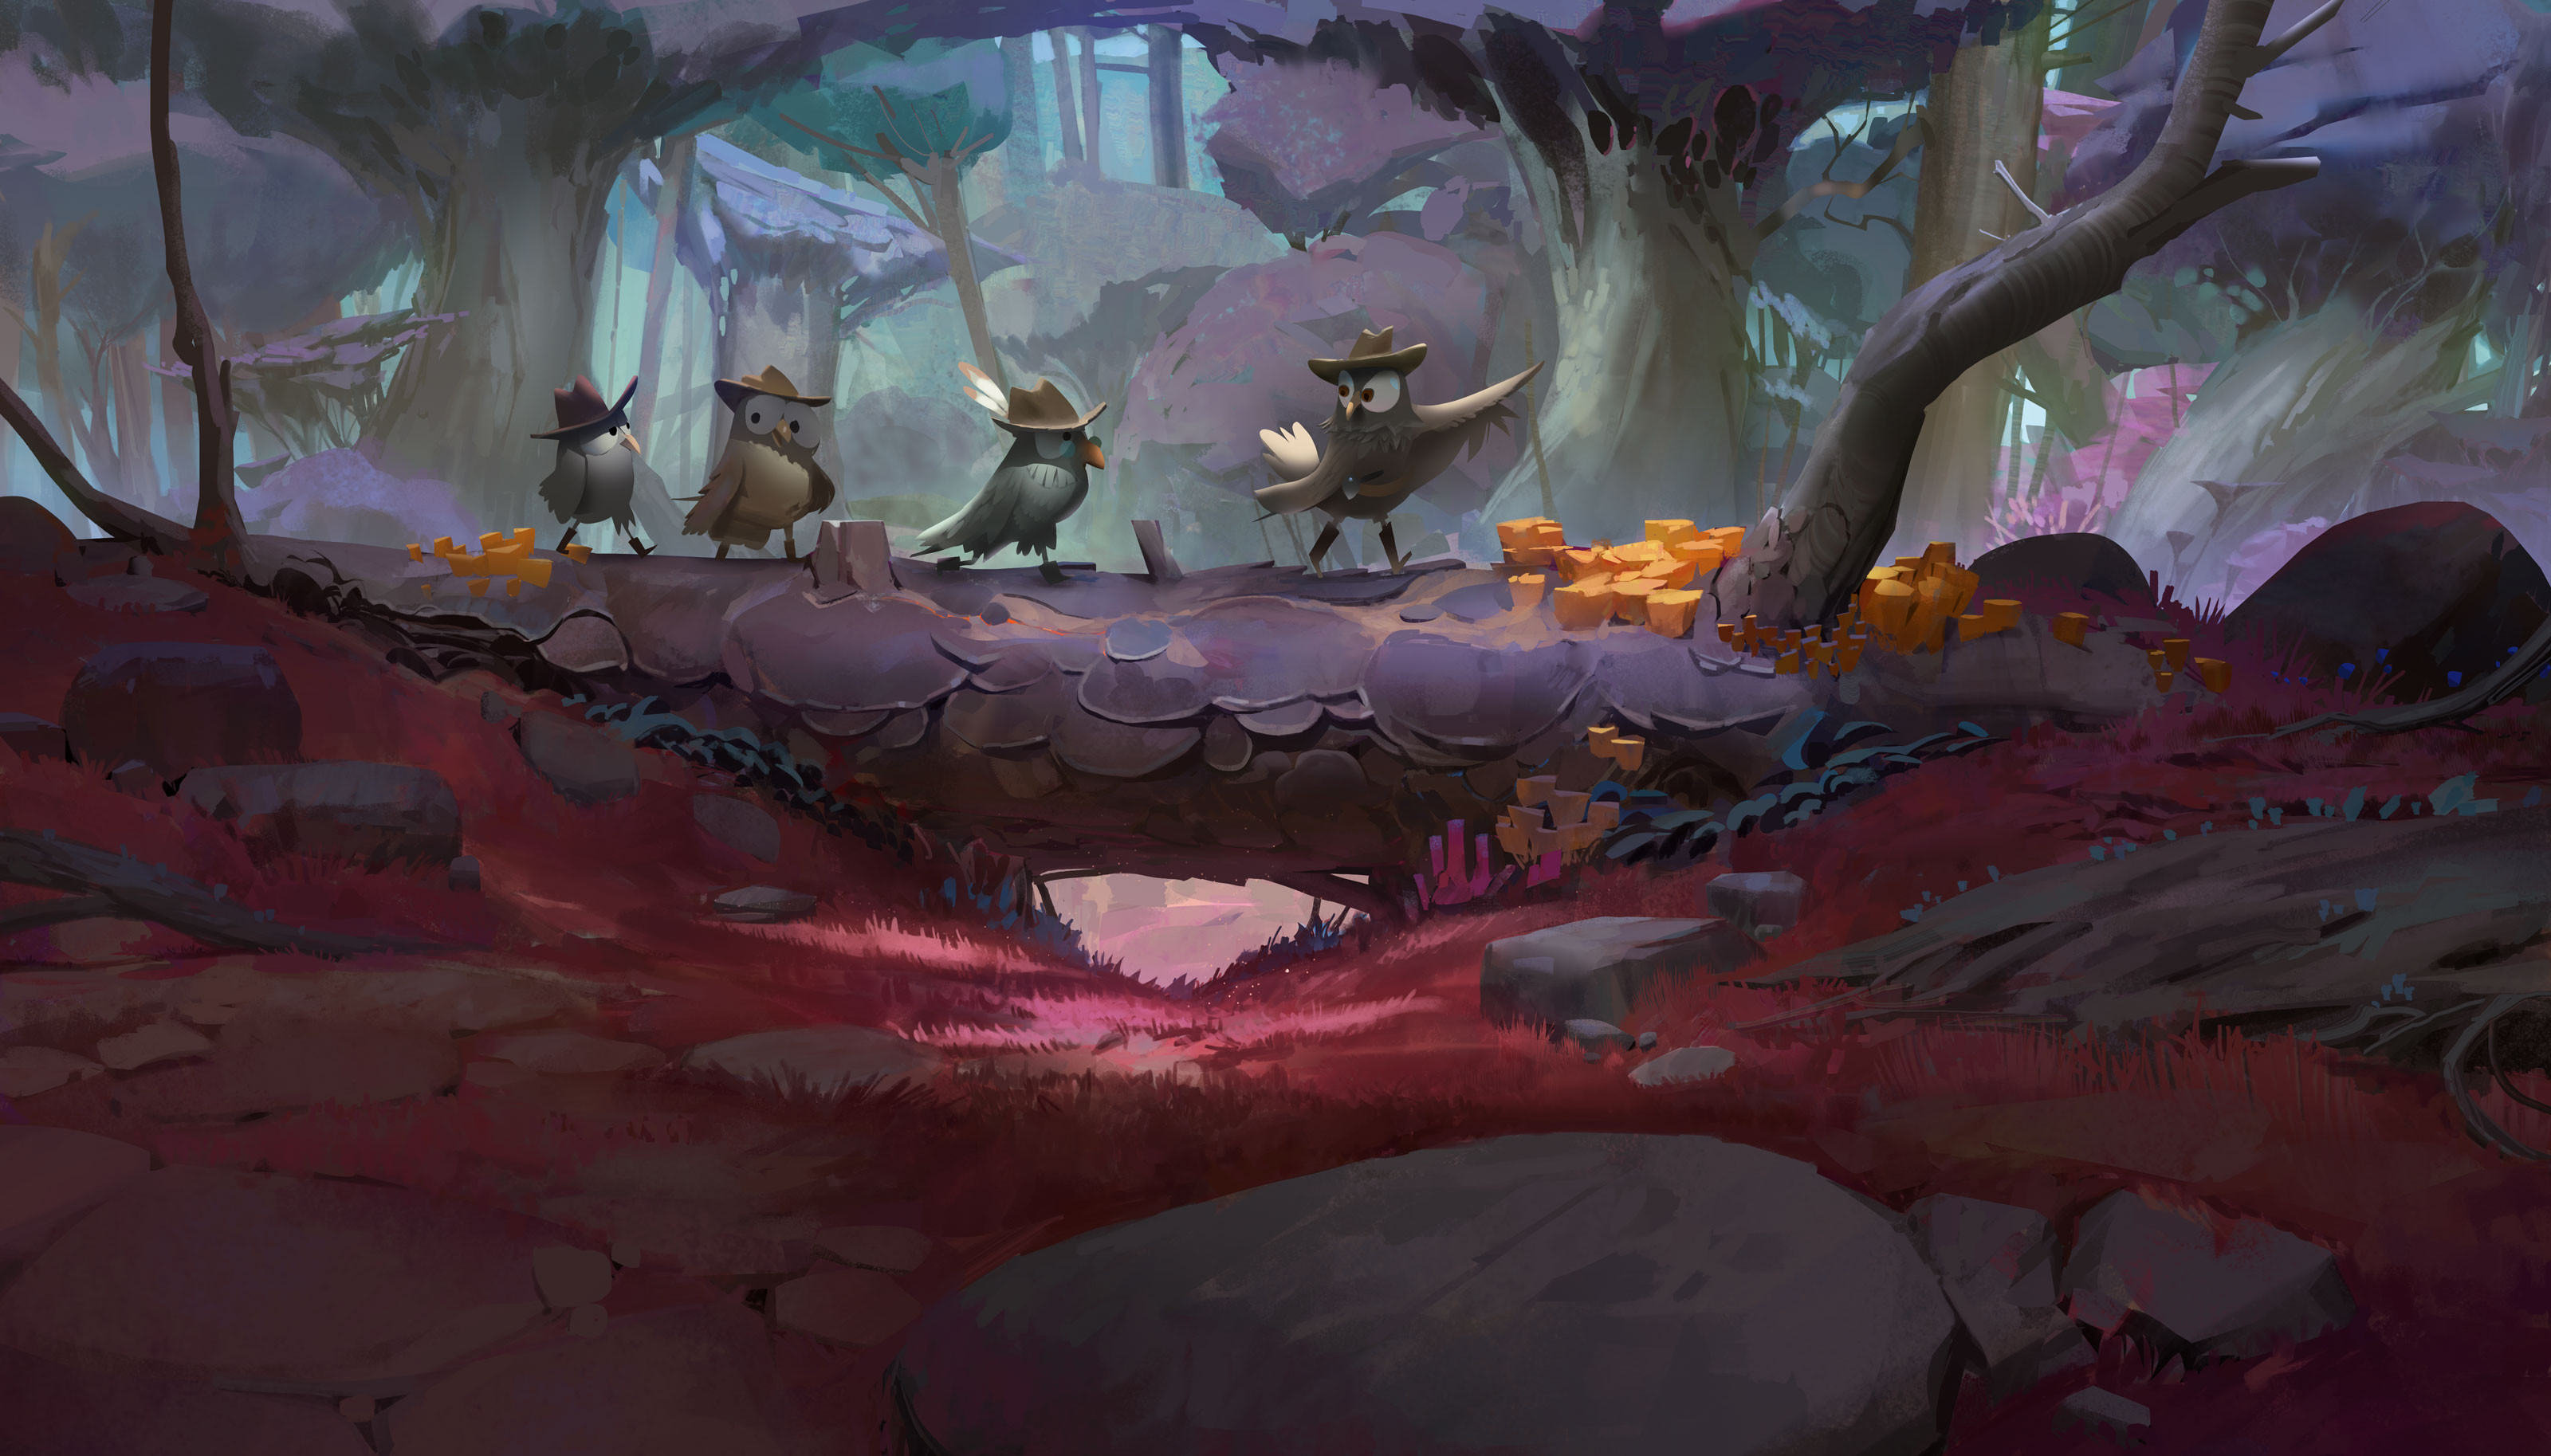 4 owls adventurers finding their way out in this mystic forest. by Baptiste Boutié